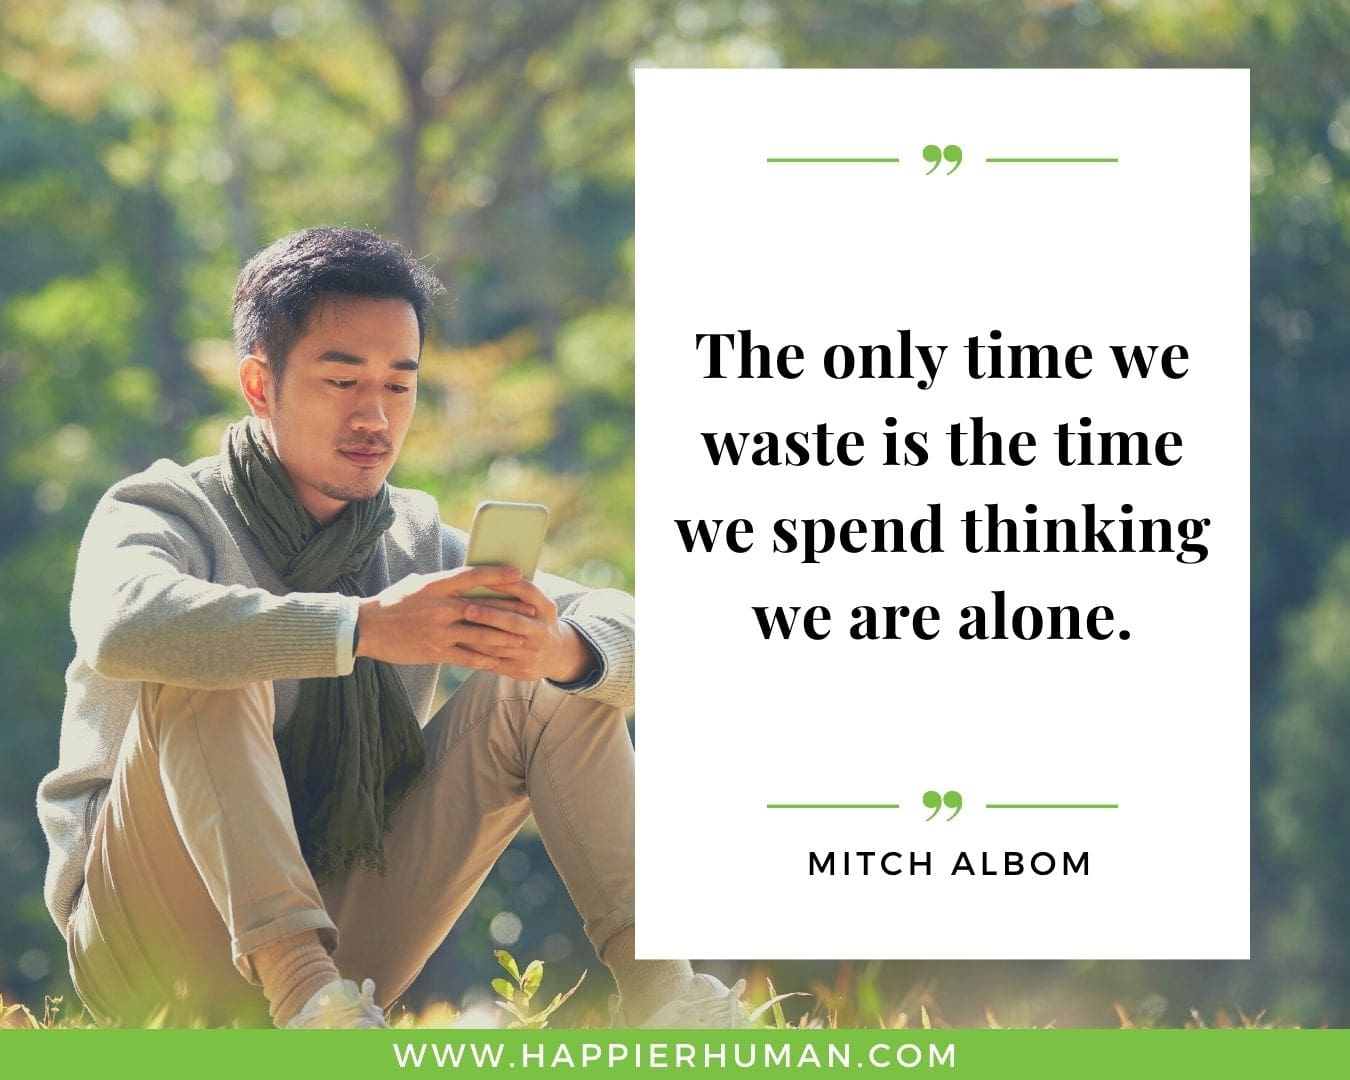 Loneliness Quotes - “The only time we waste is the time we spend thinking we are alone.”– Mitch Albom